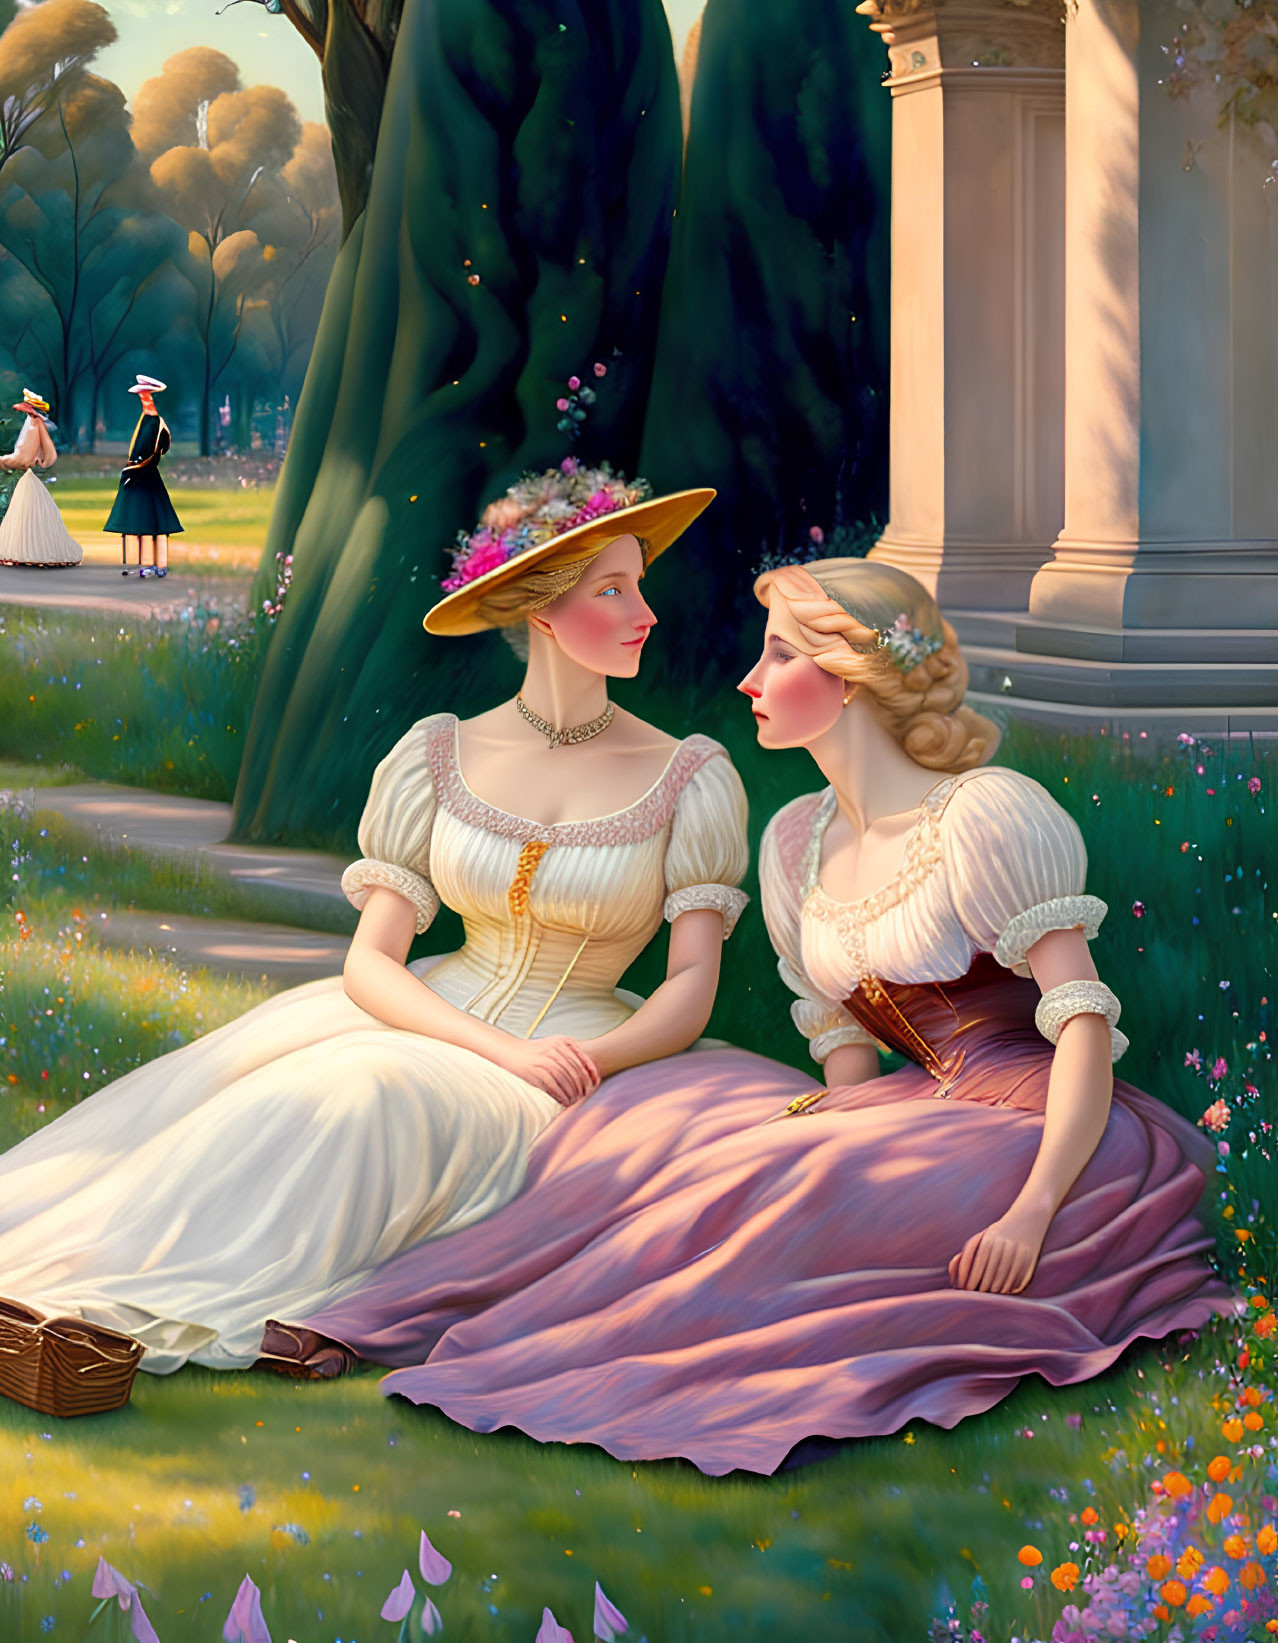 Historical women in elegant dresses in sunlit park with classical architecture